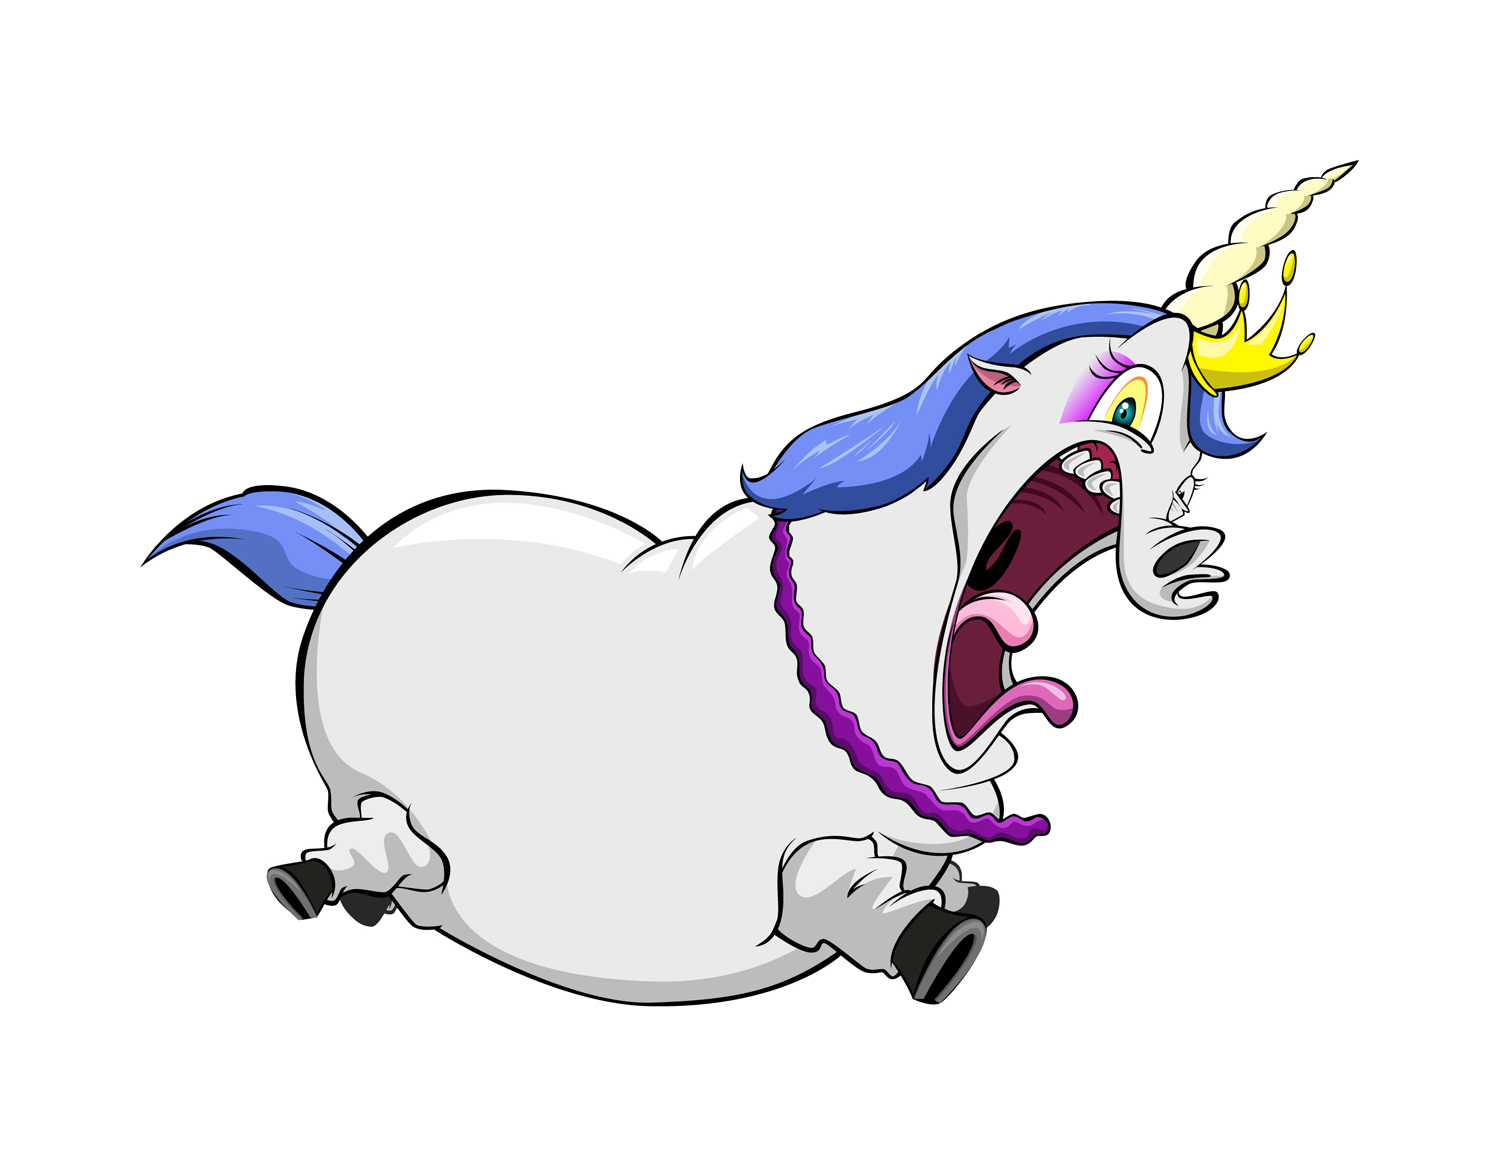  animated unicorn pictures Free cliparts that you can download to